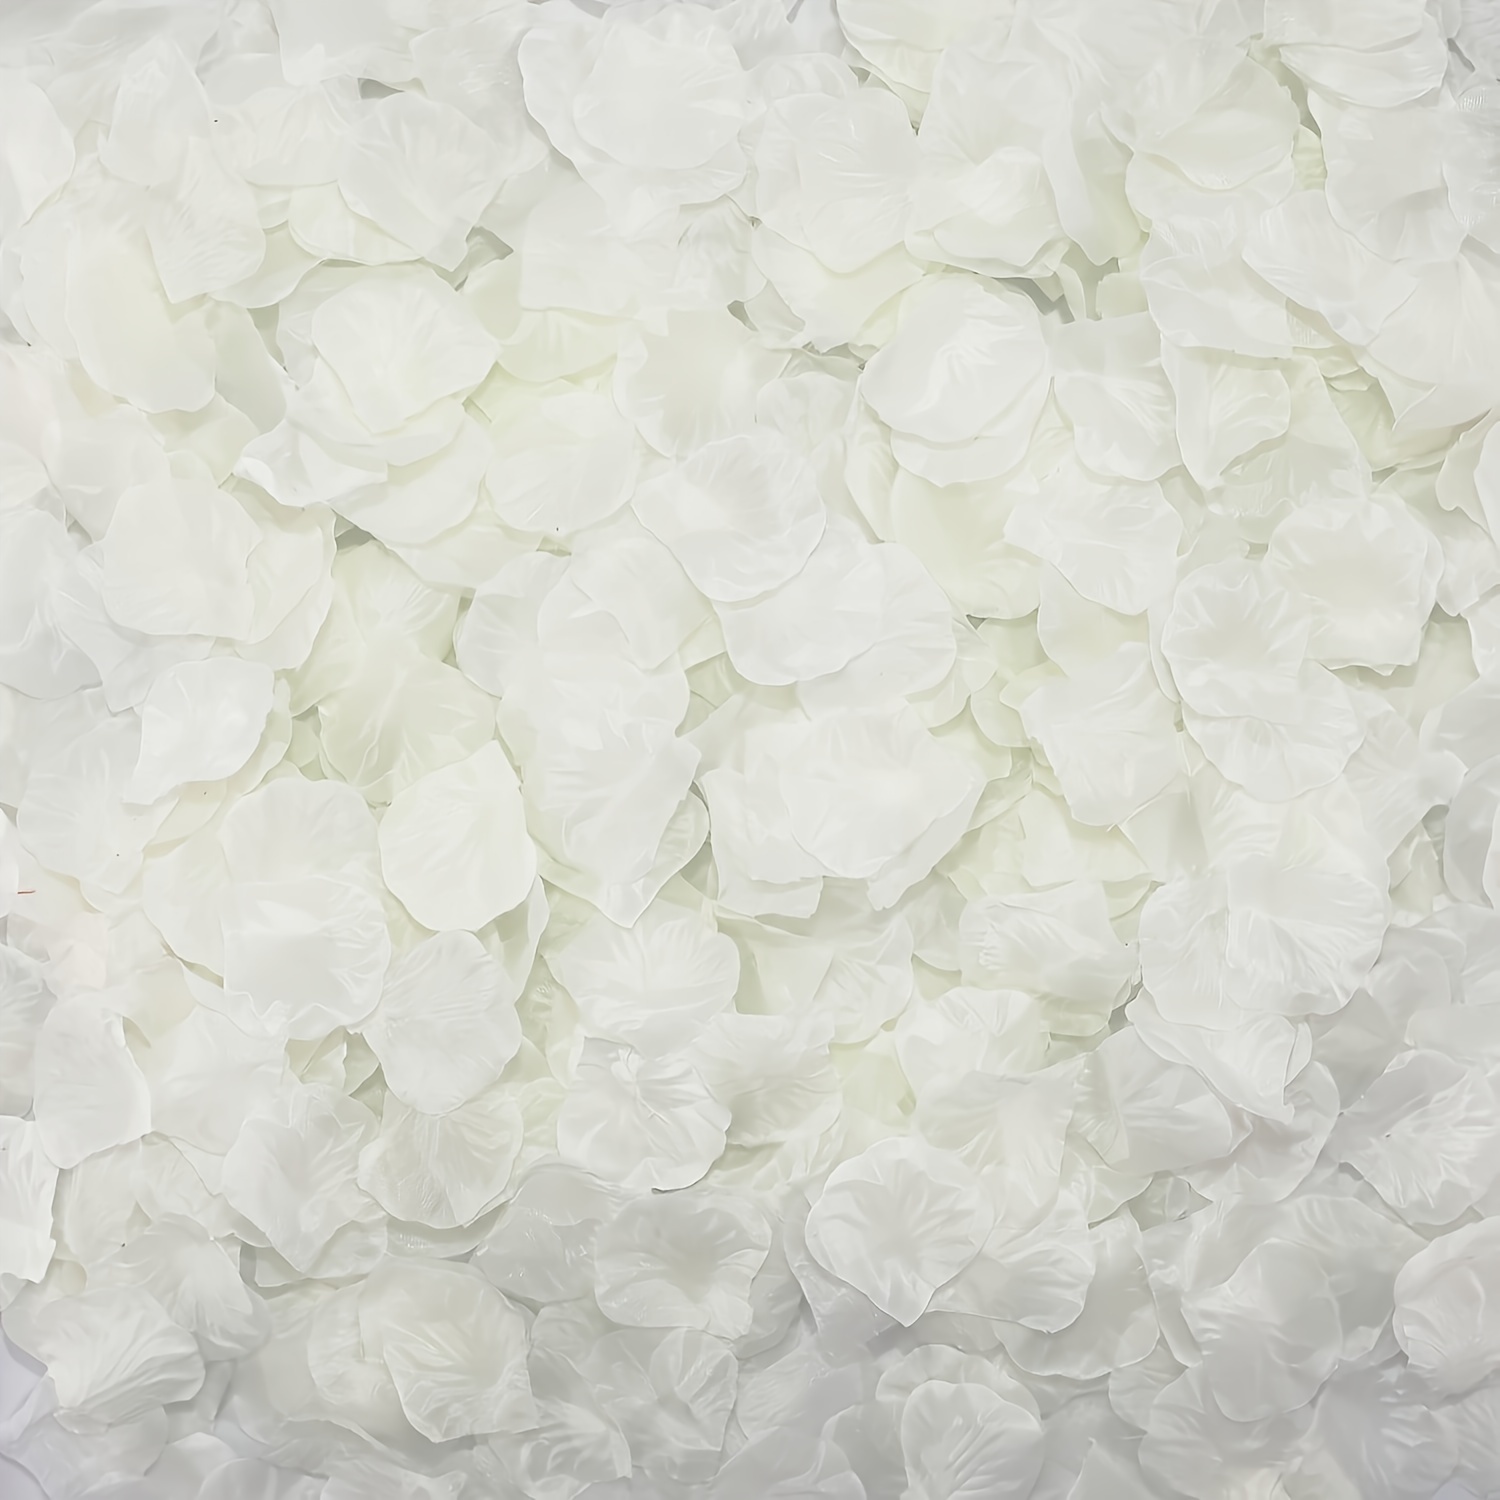 

1000pcs Of White Rose Petals Suitable For Romantic Night Wedding Party Decoration, Valentine's Day Wedding Proposal Decoration Petals, Fake Rose, Artificial Rose Petals Easter Gift